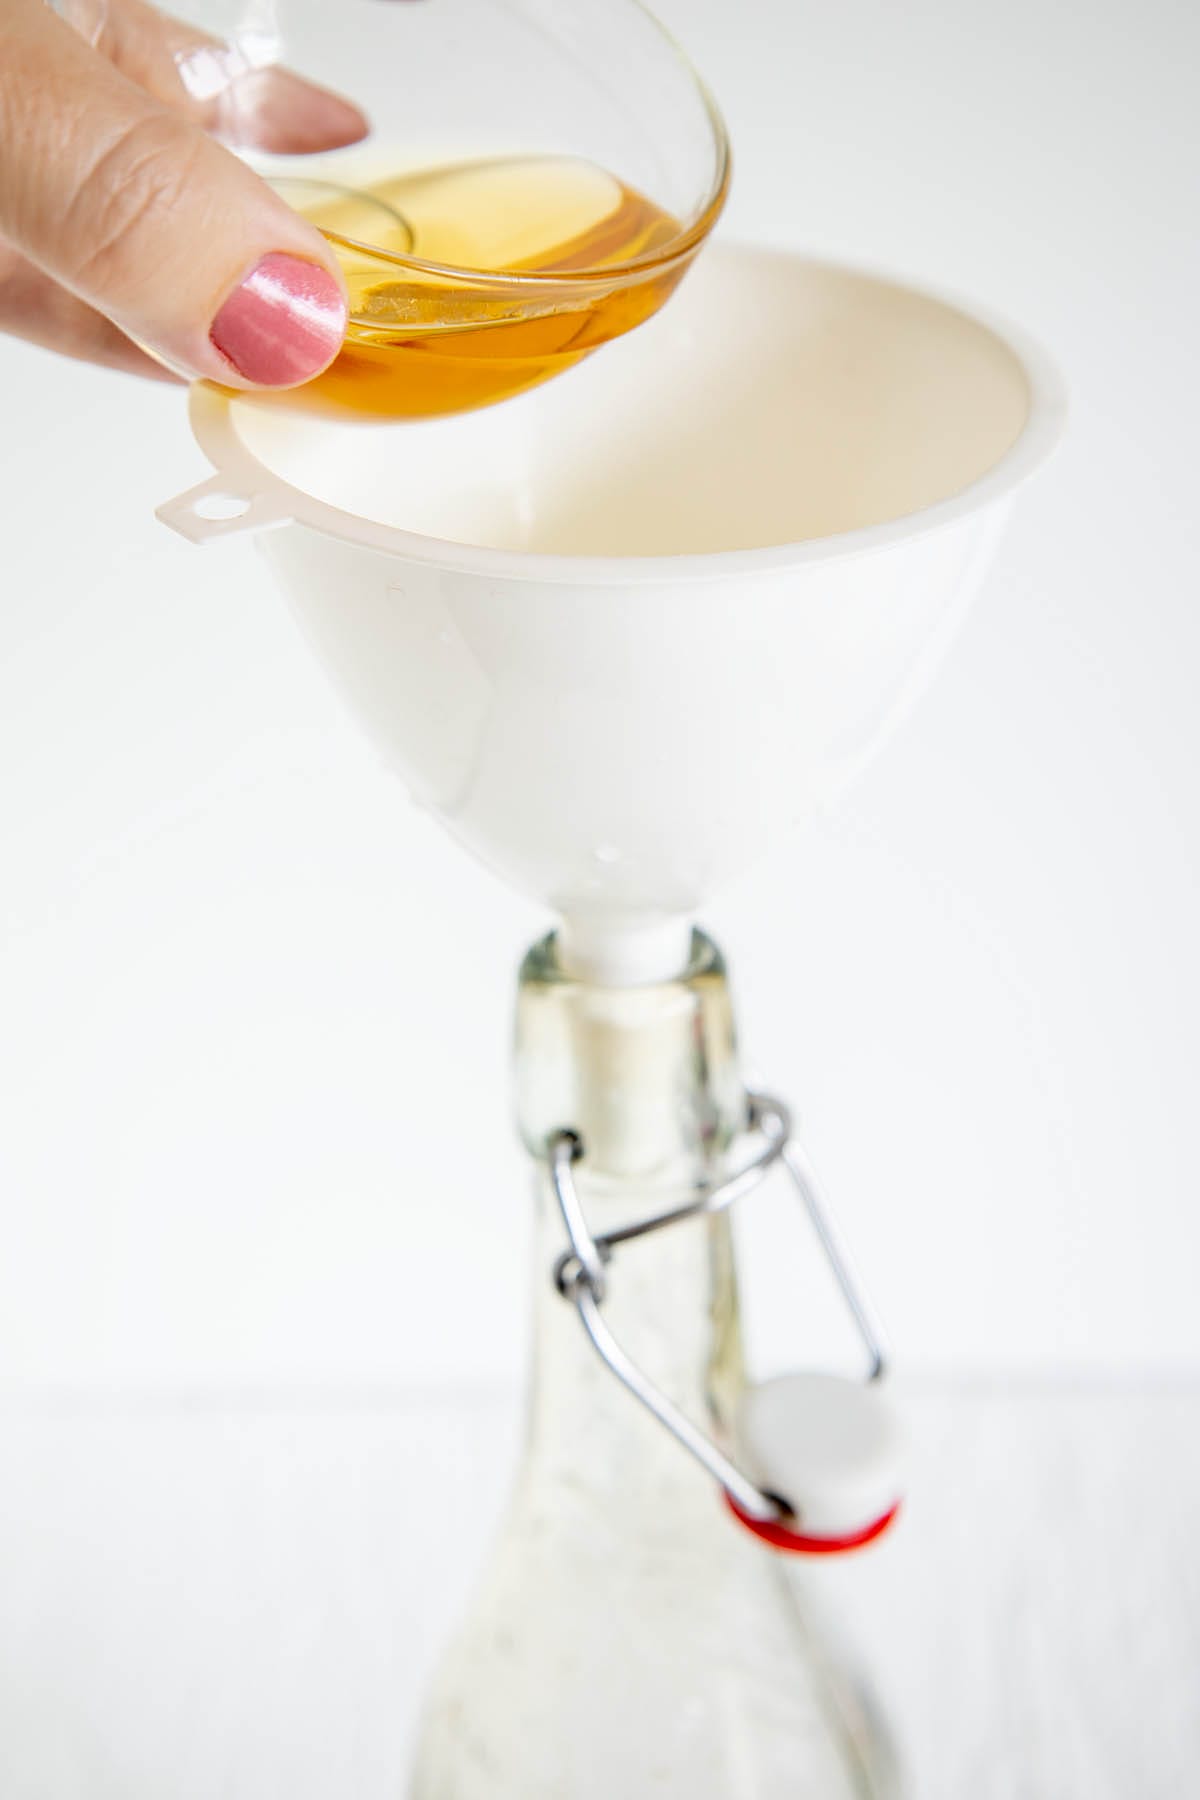 Agave syrup being poured into a funnel into a bottle.